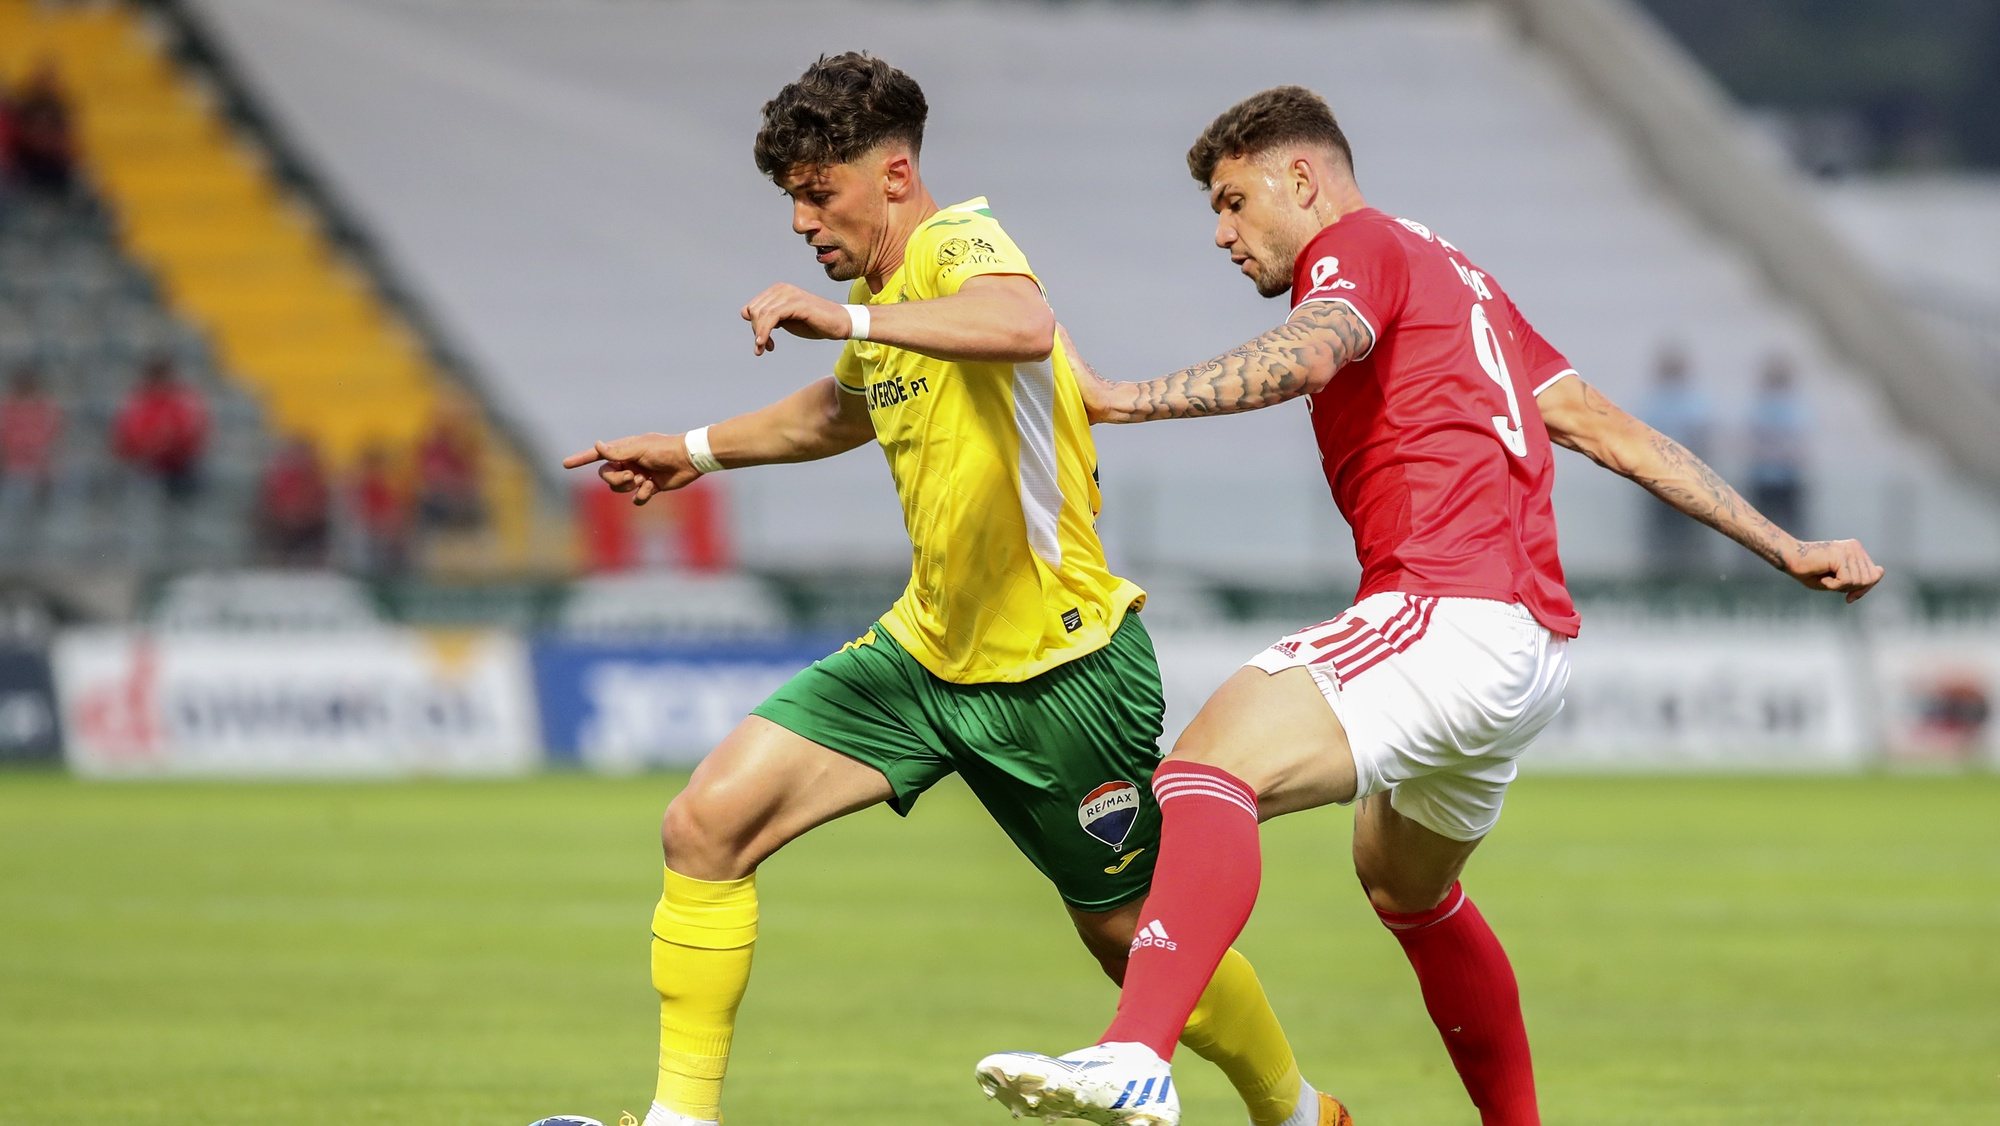 Pacos de Ferreira&#039;s Butzke (L) in action against Benfica&#039;s Morato during their Portuguese First League soccer match, held at Capital do Movel stadium, Pacos de Ferreira, Portugal, 13th May 2022. JOSE COELHO/LUSA